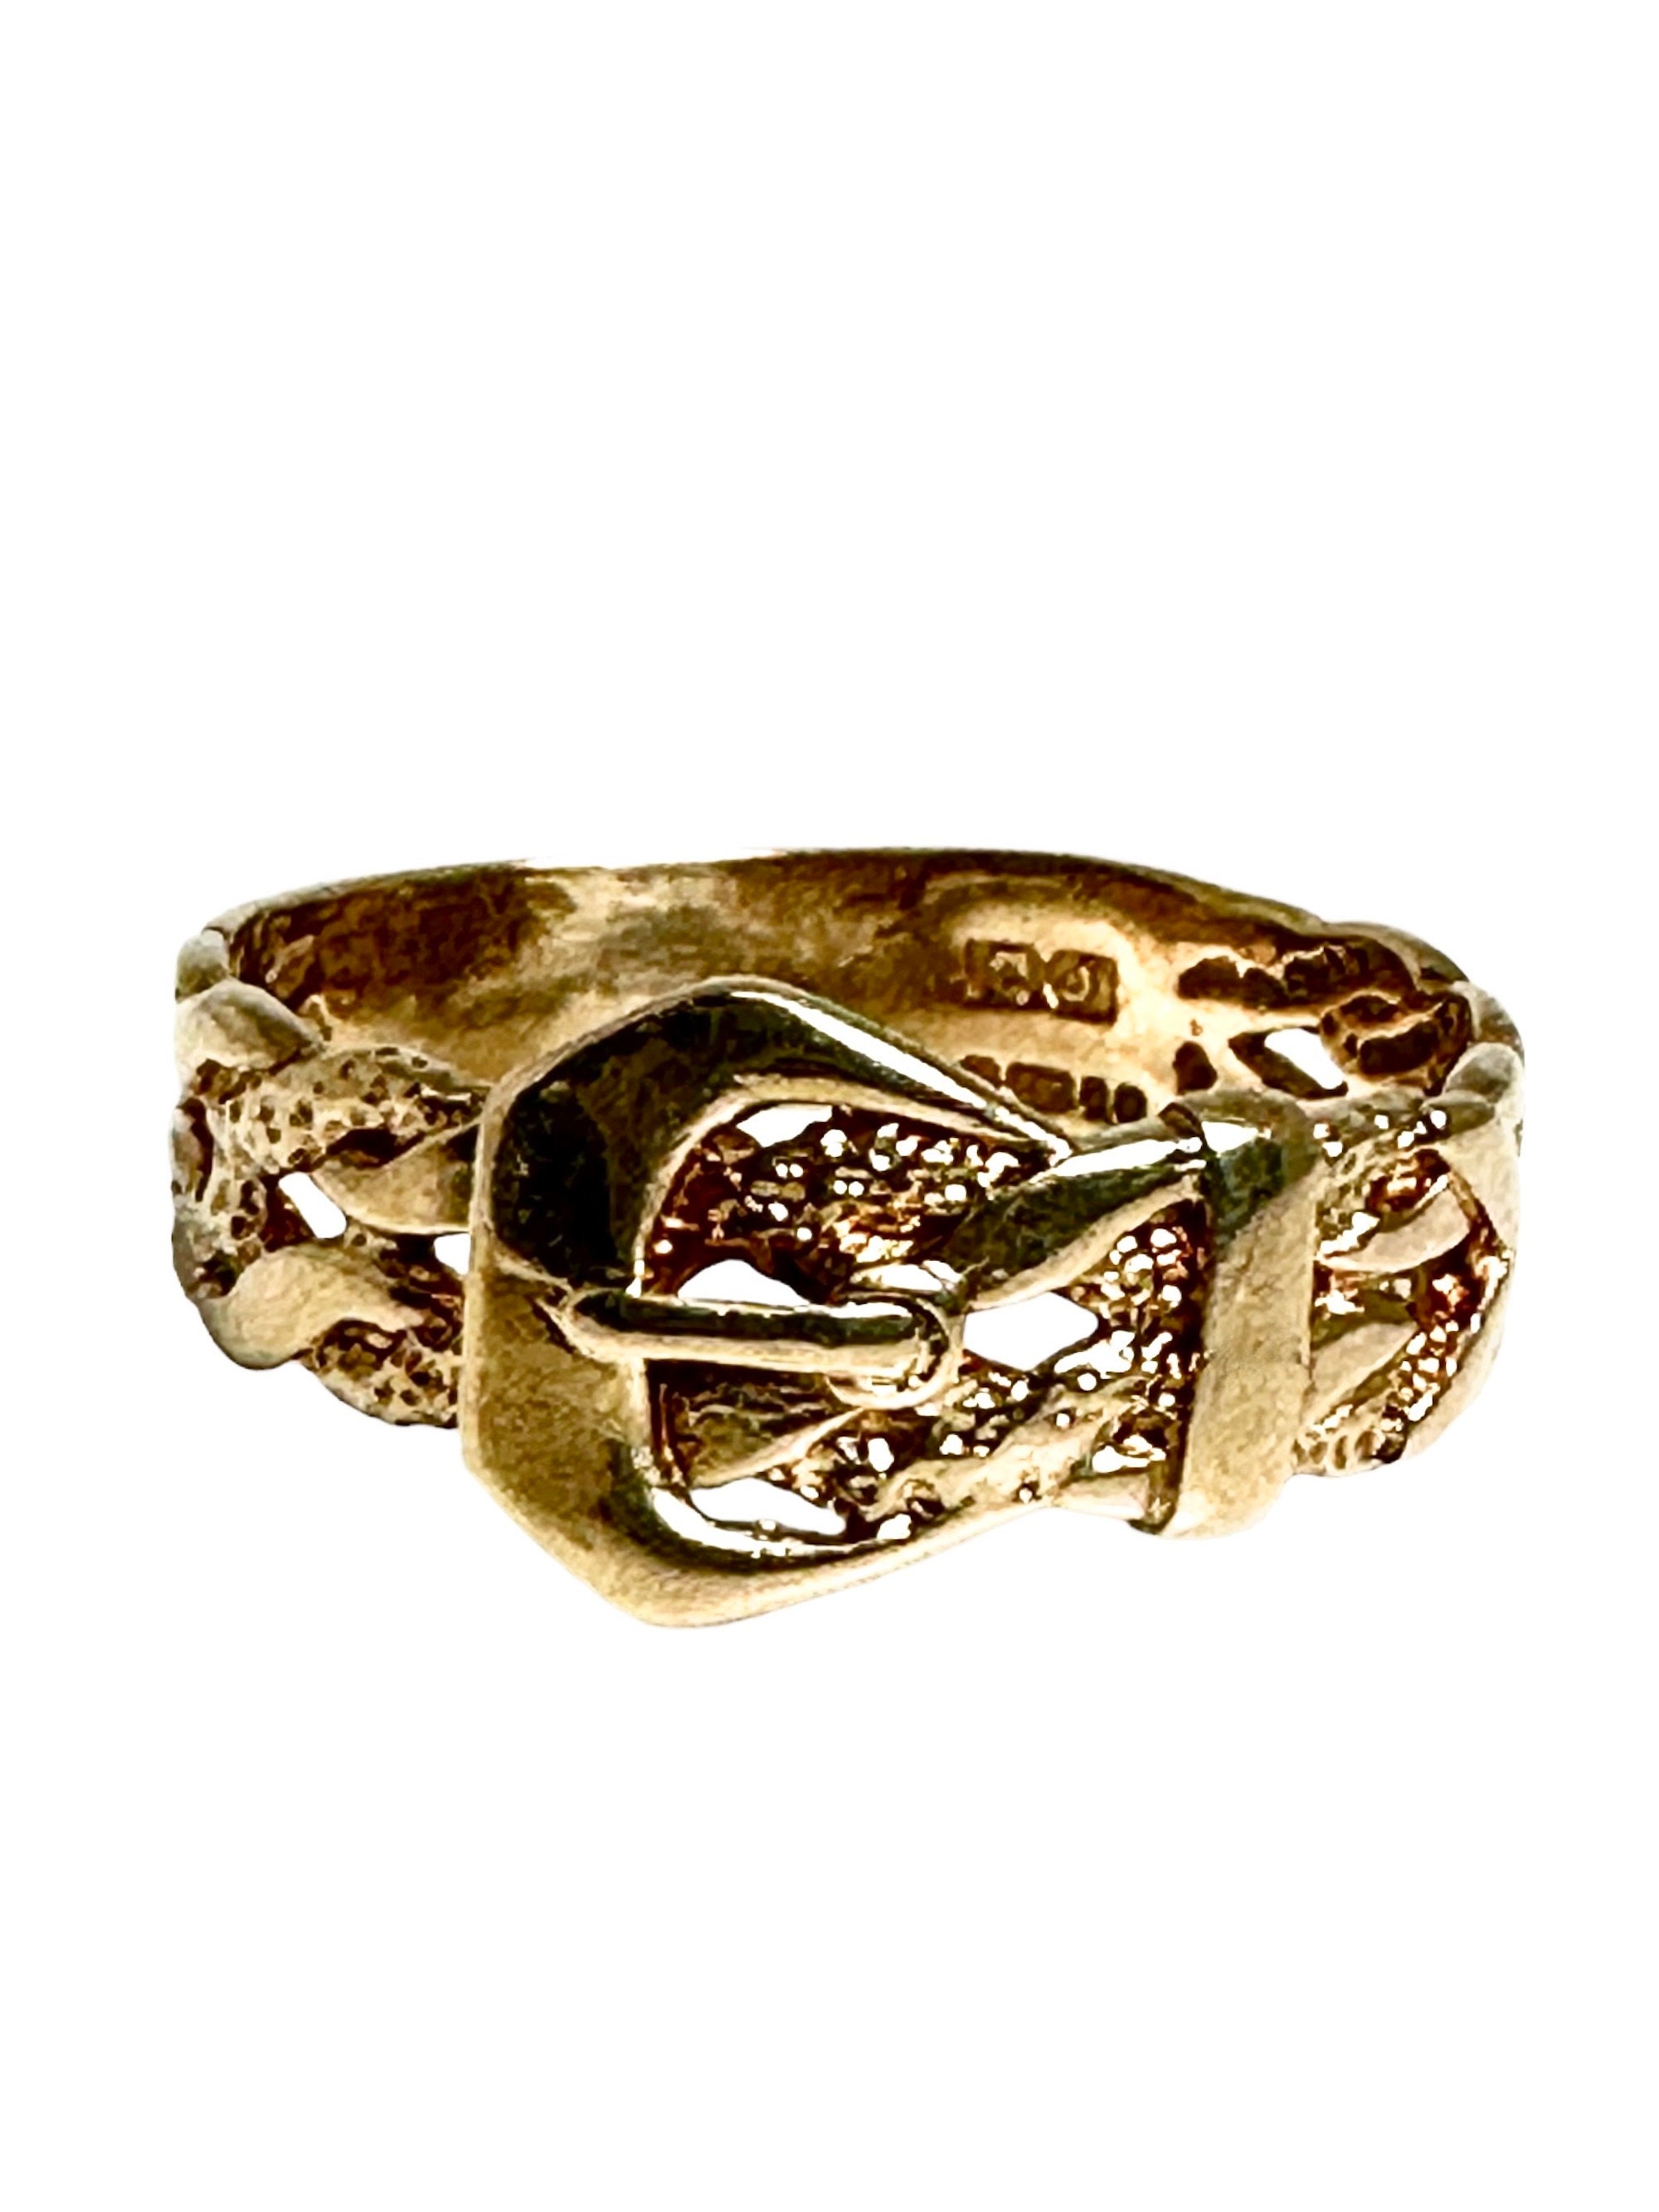 Solid 9ct Yellow Gold Belt Buckle Ring, Men's Women's 9K Band 